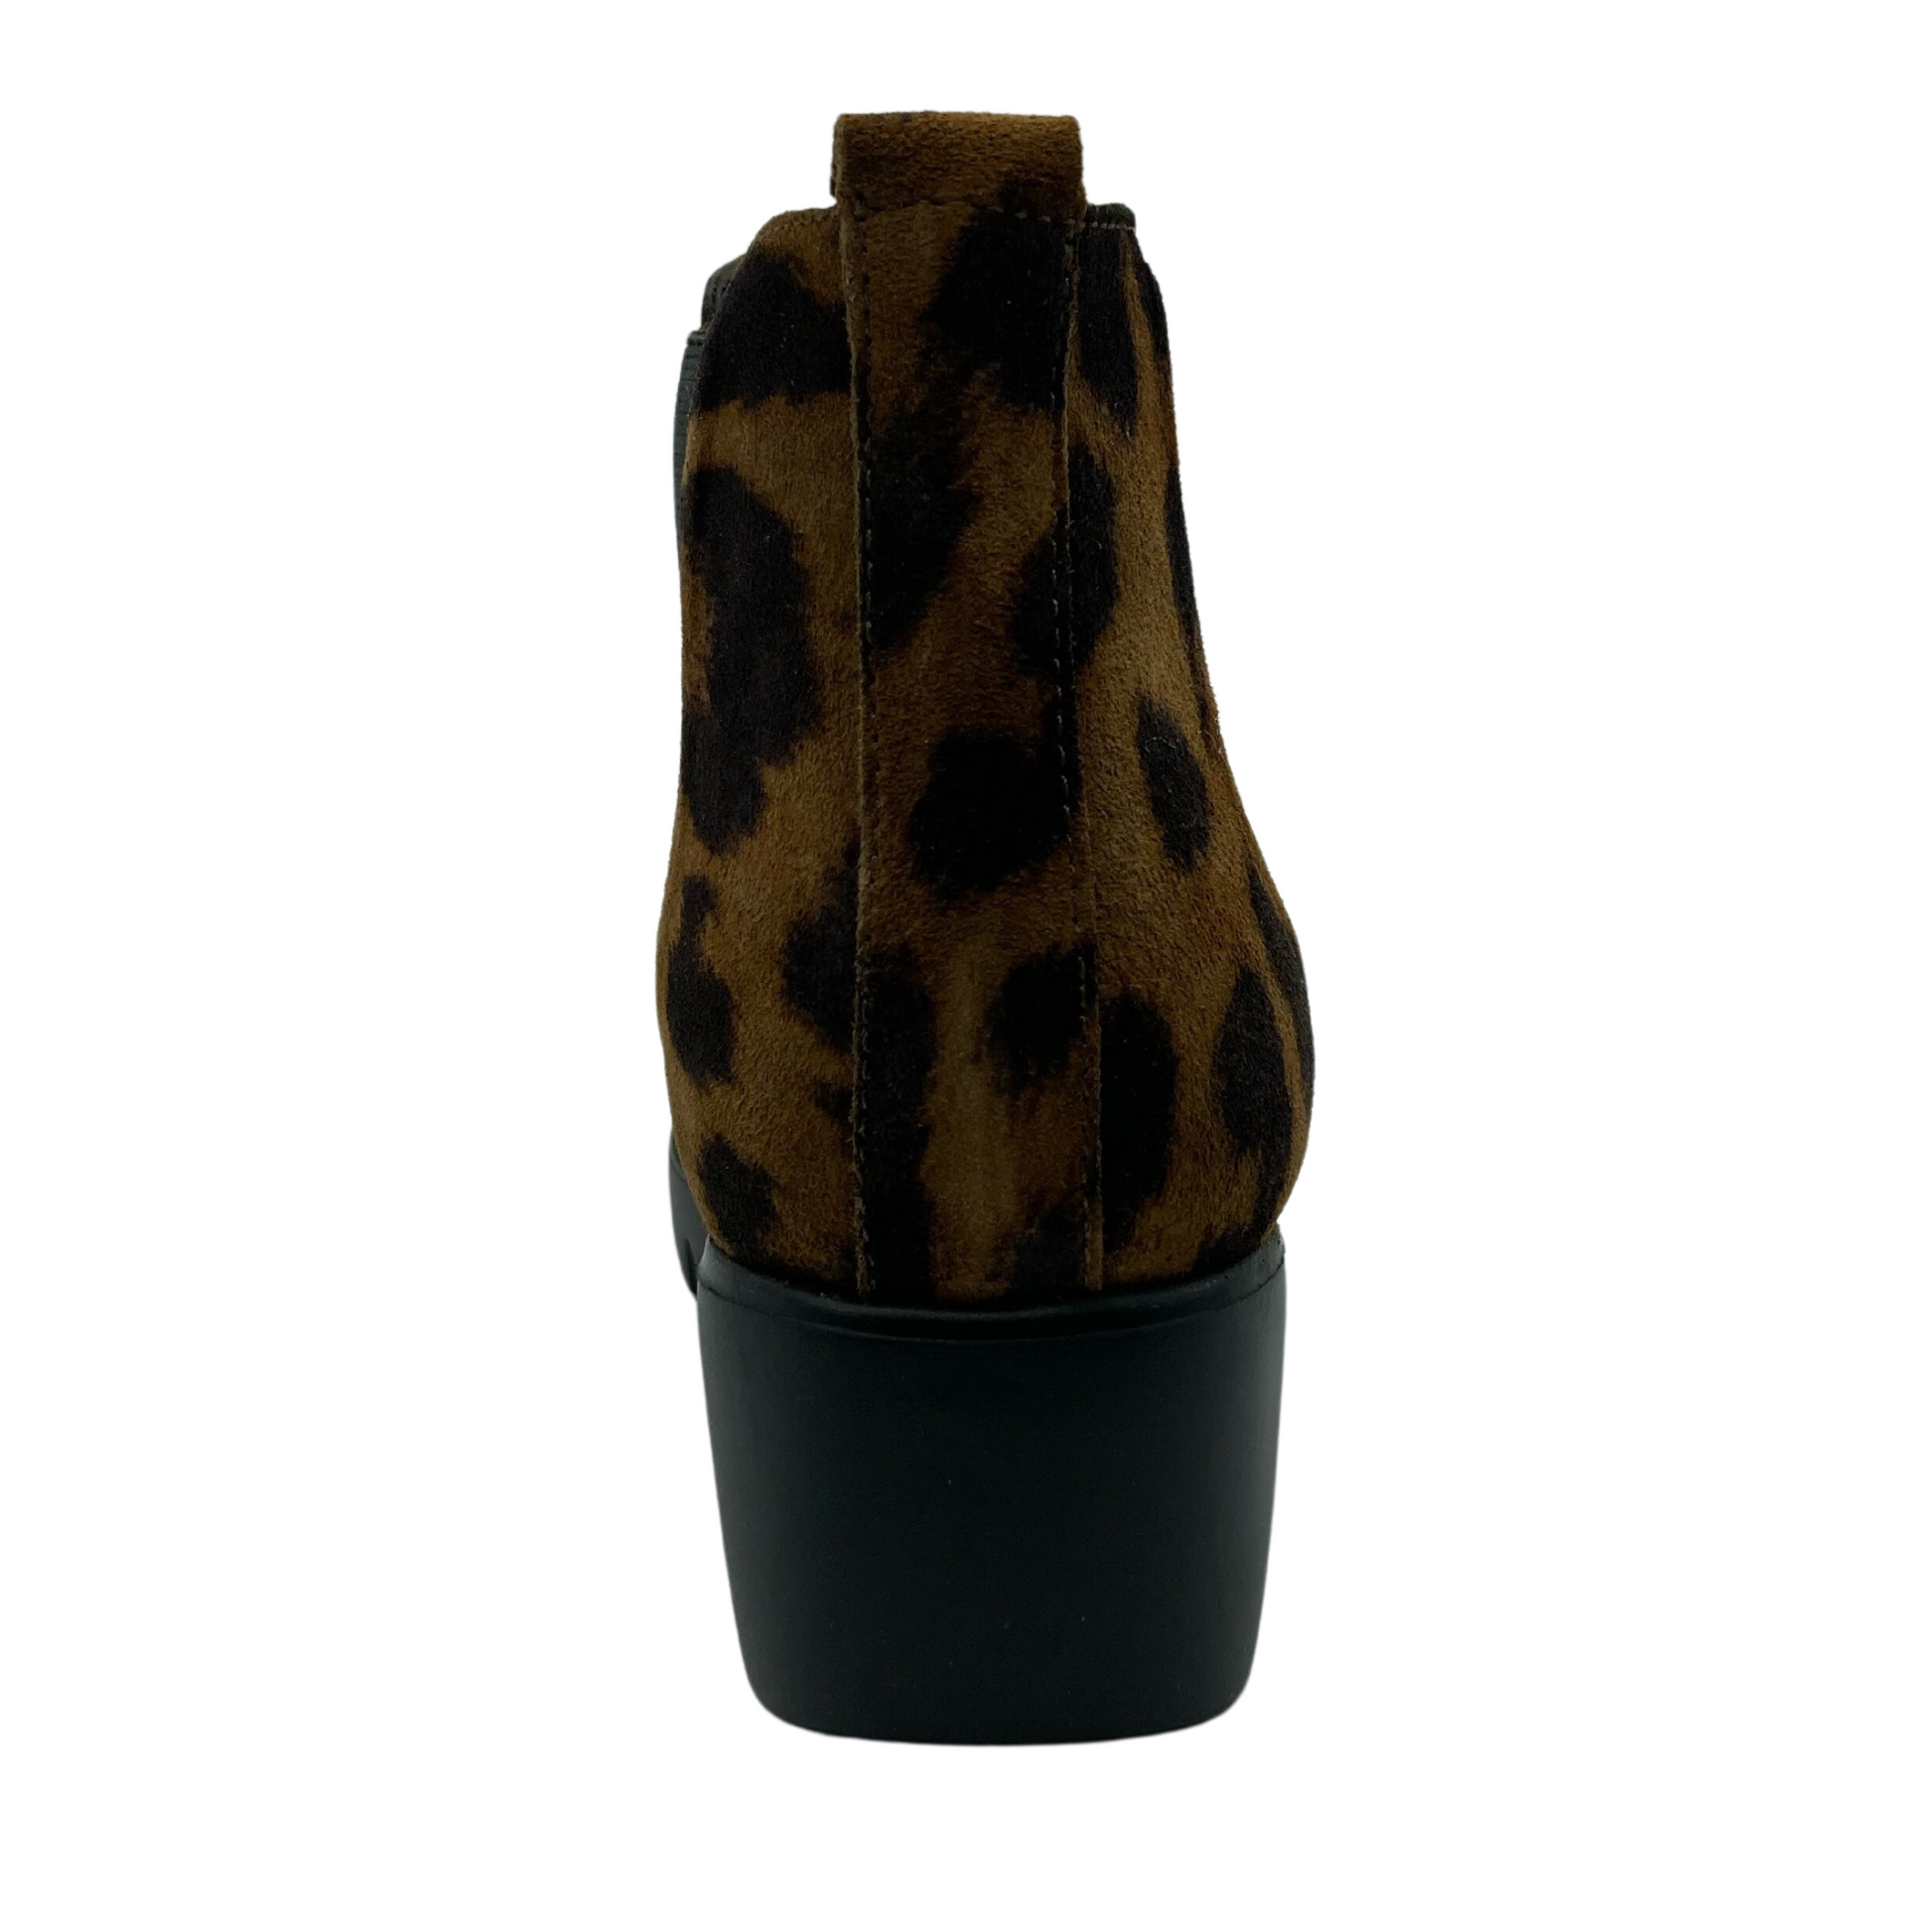 Back view of leopard suede short boot with black rubber wedge heel